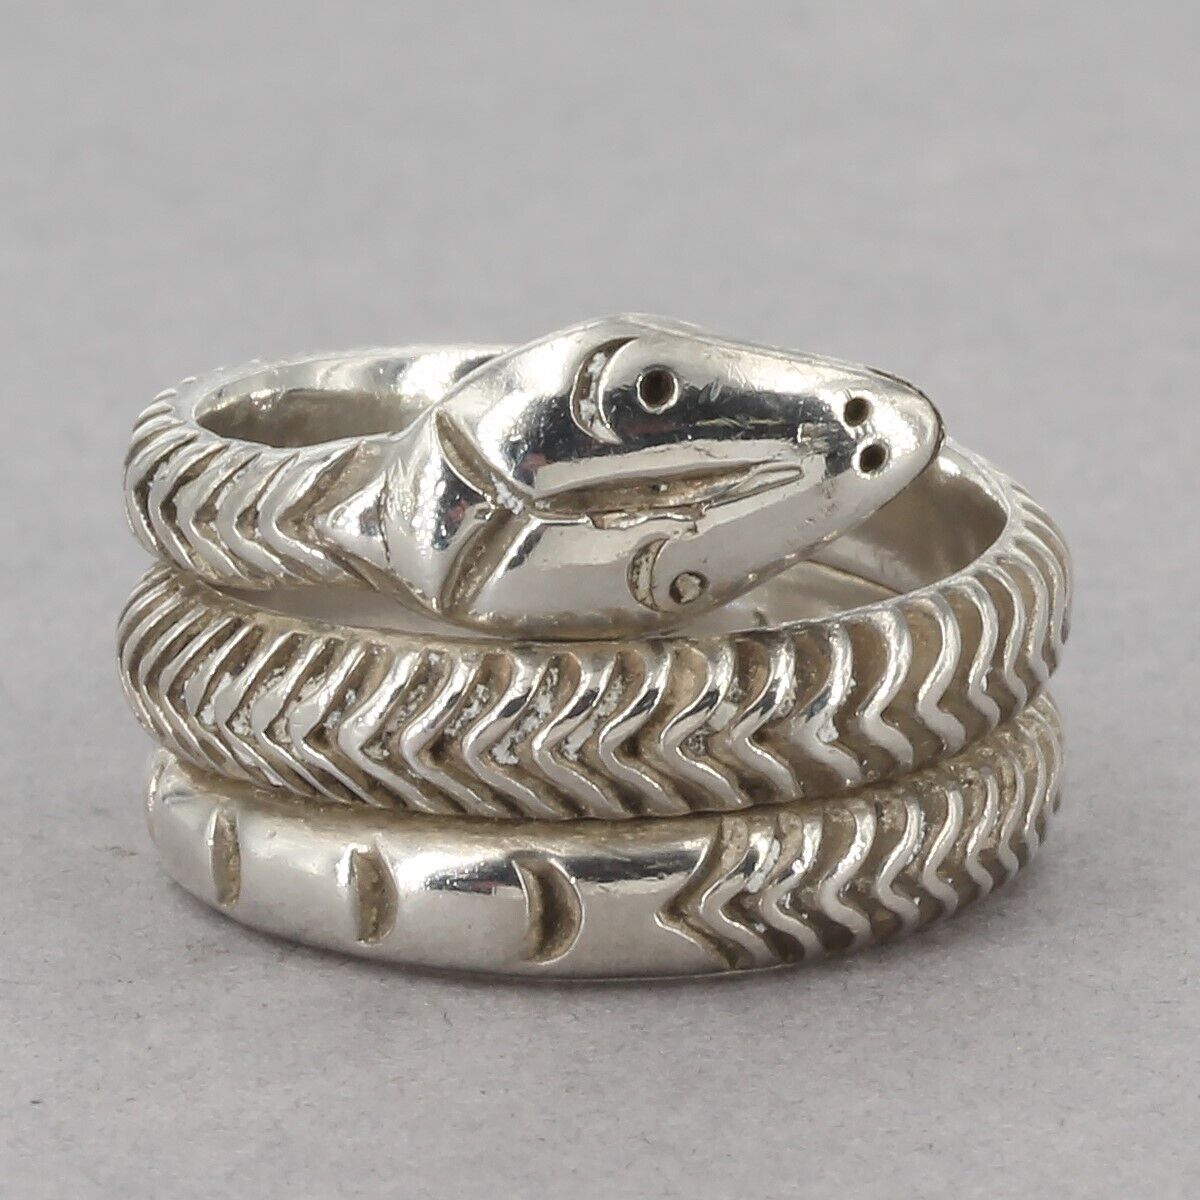 Vintage Signed Balderas Taxco Mexican Sterling Coiled Snake Wrap Ring Size 5.5